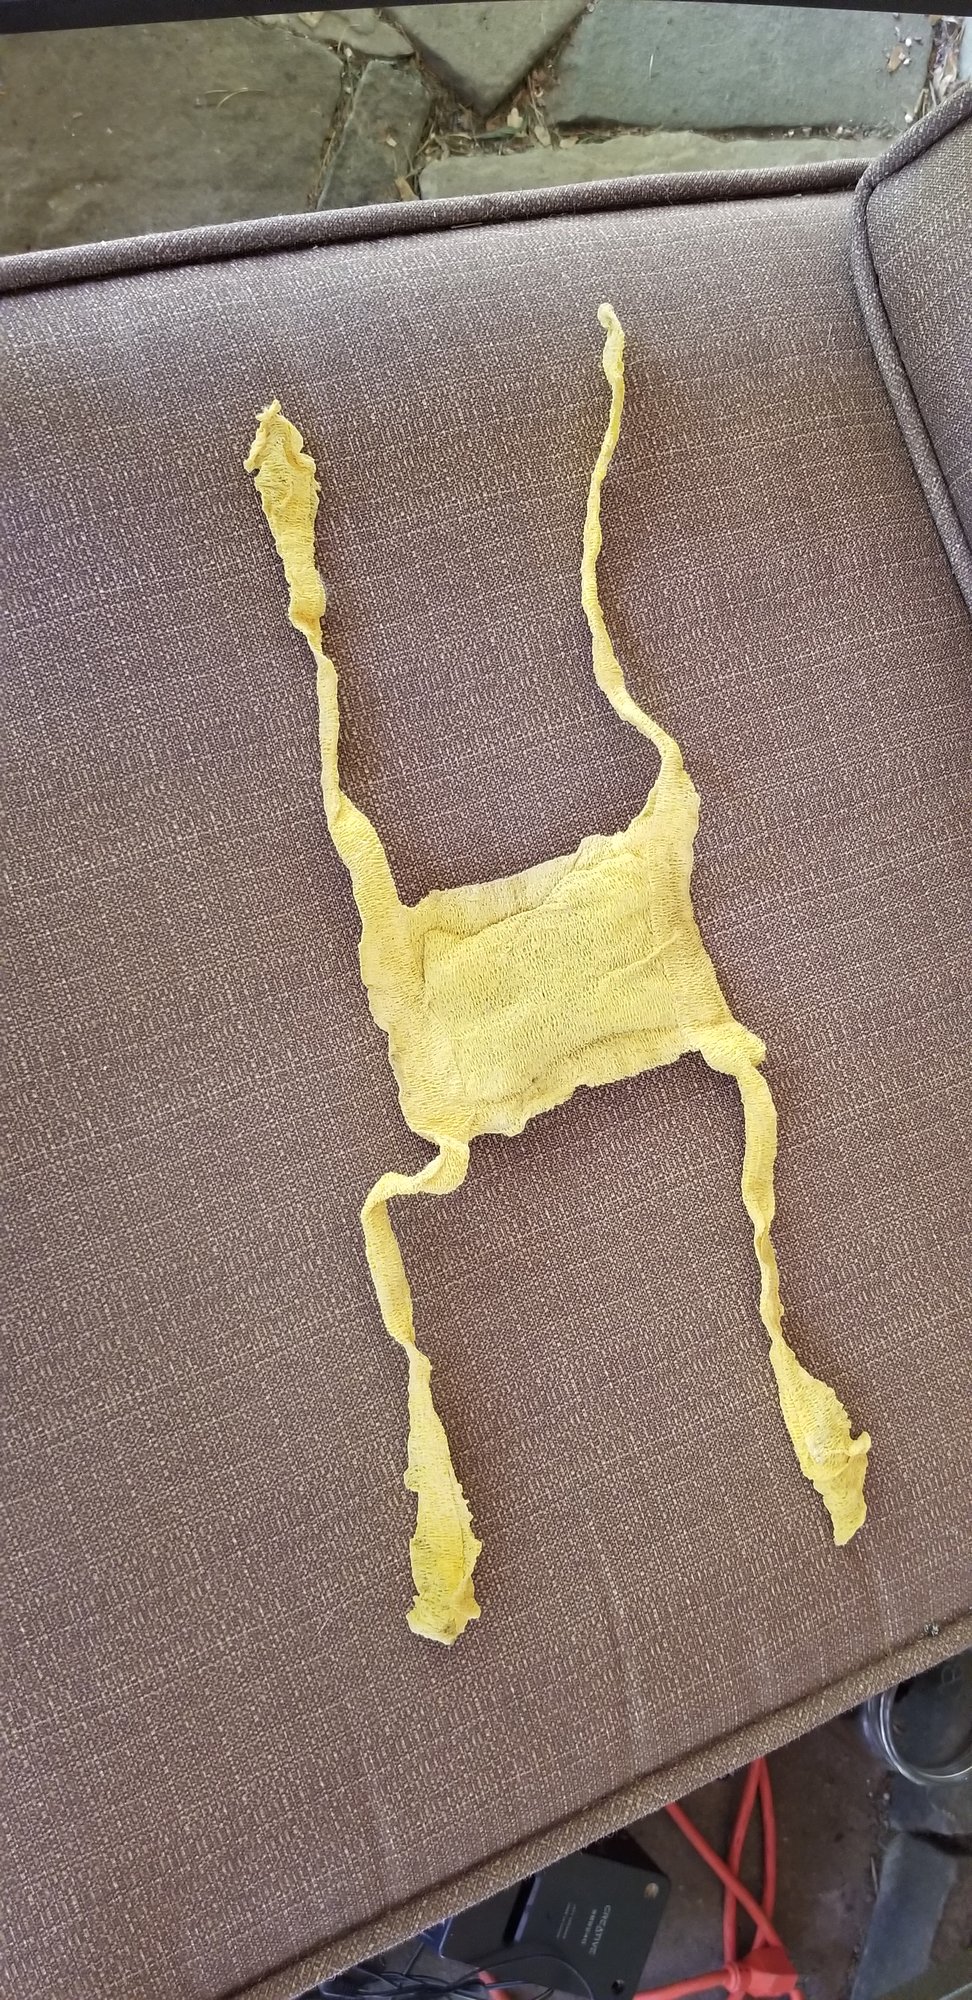 https://www.backyardchickens.com/articles/how-to-make-a-chicken-bra-from-less-than-4-feet-of-vet-wrap.74129/cover-image